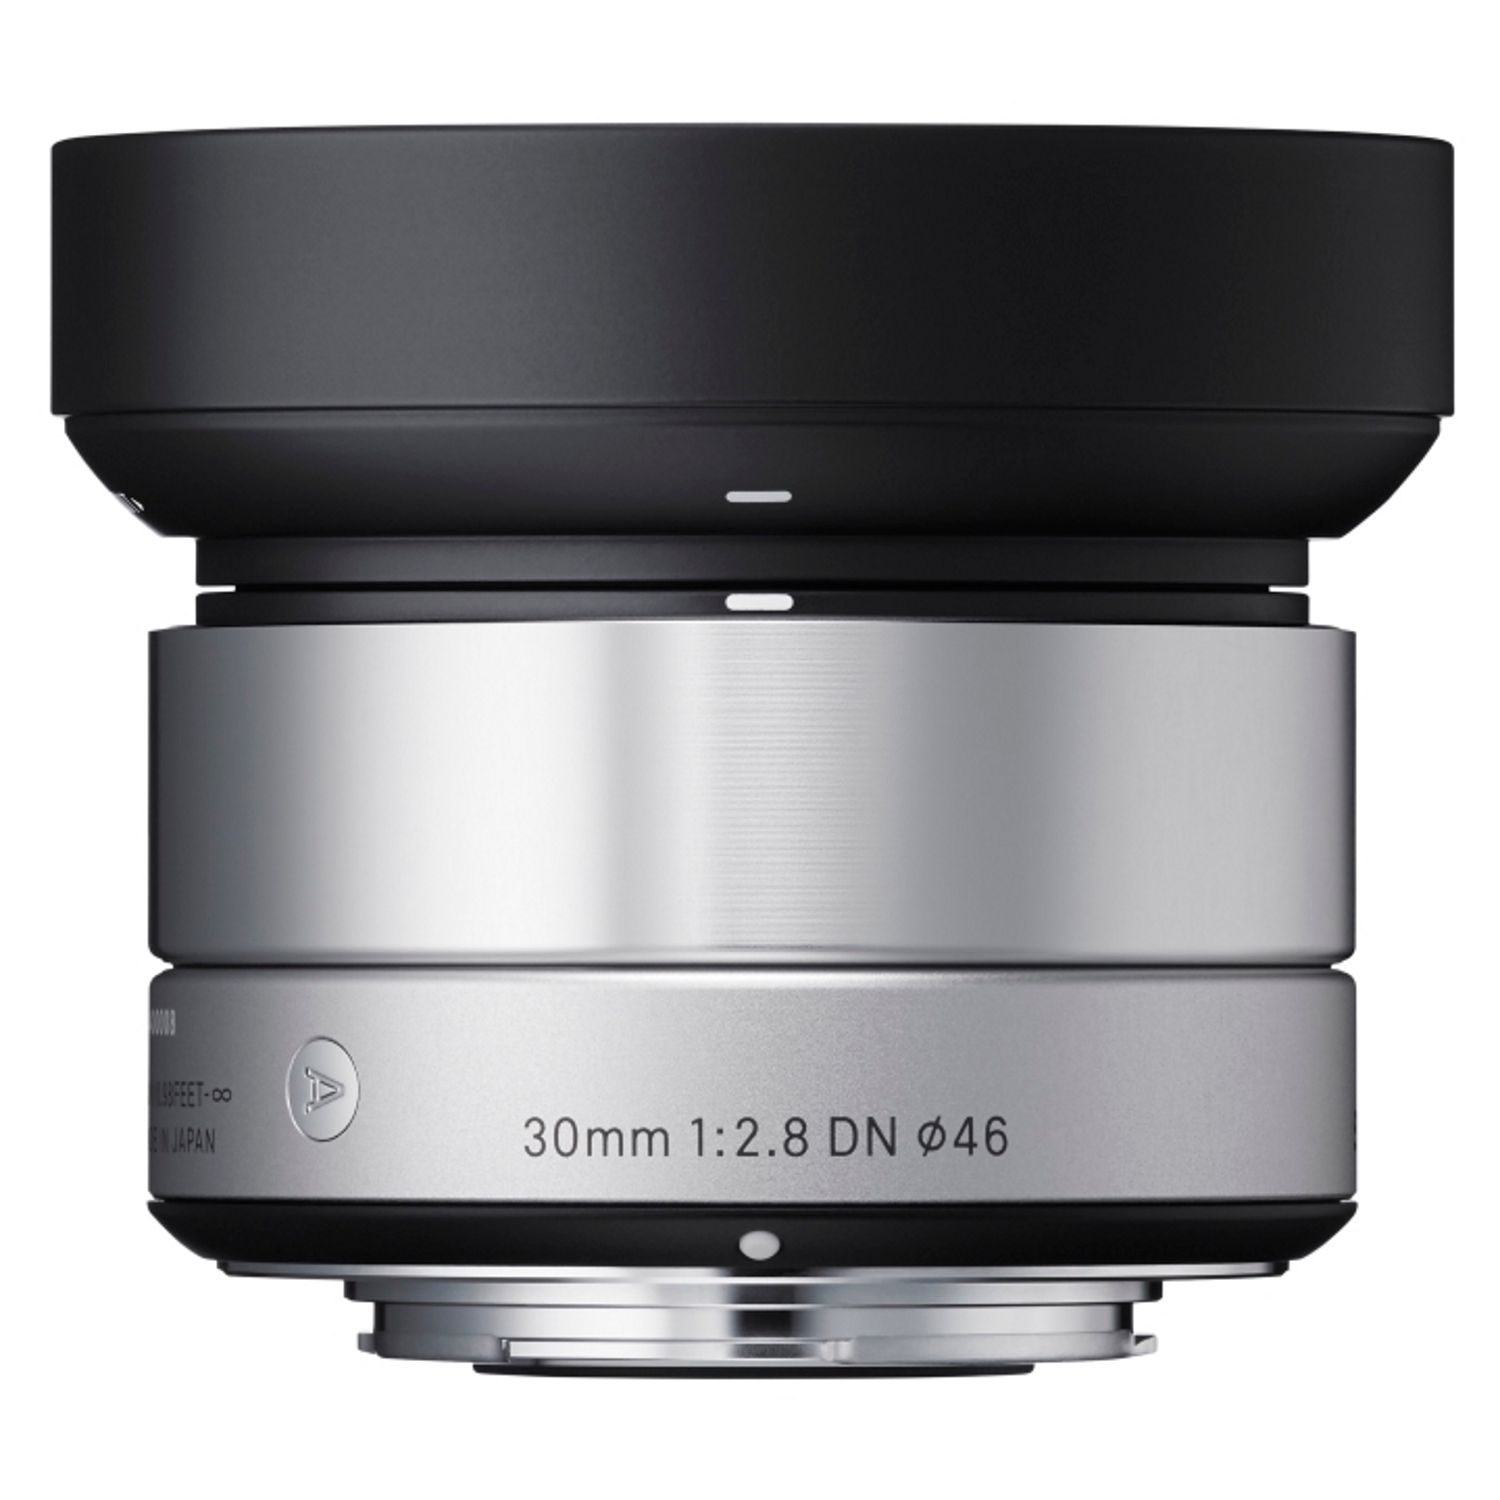 Sigma 30mm f/2.8 DN Silver Art Lens for Micro Four Thirds